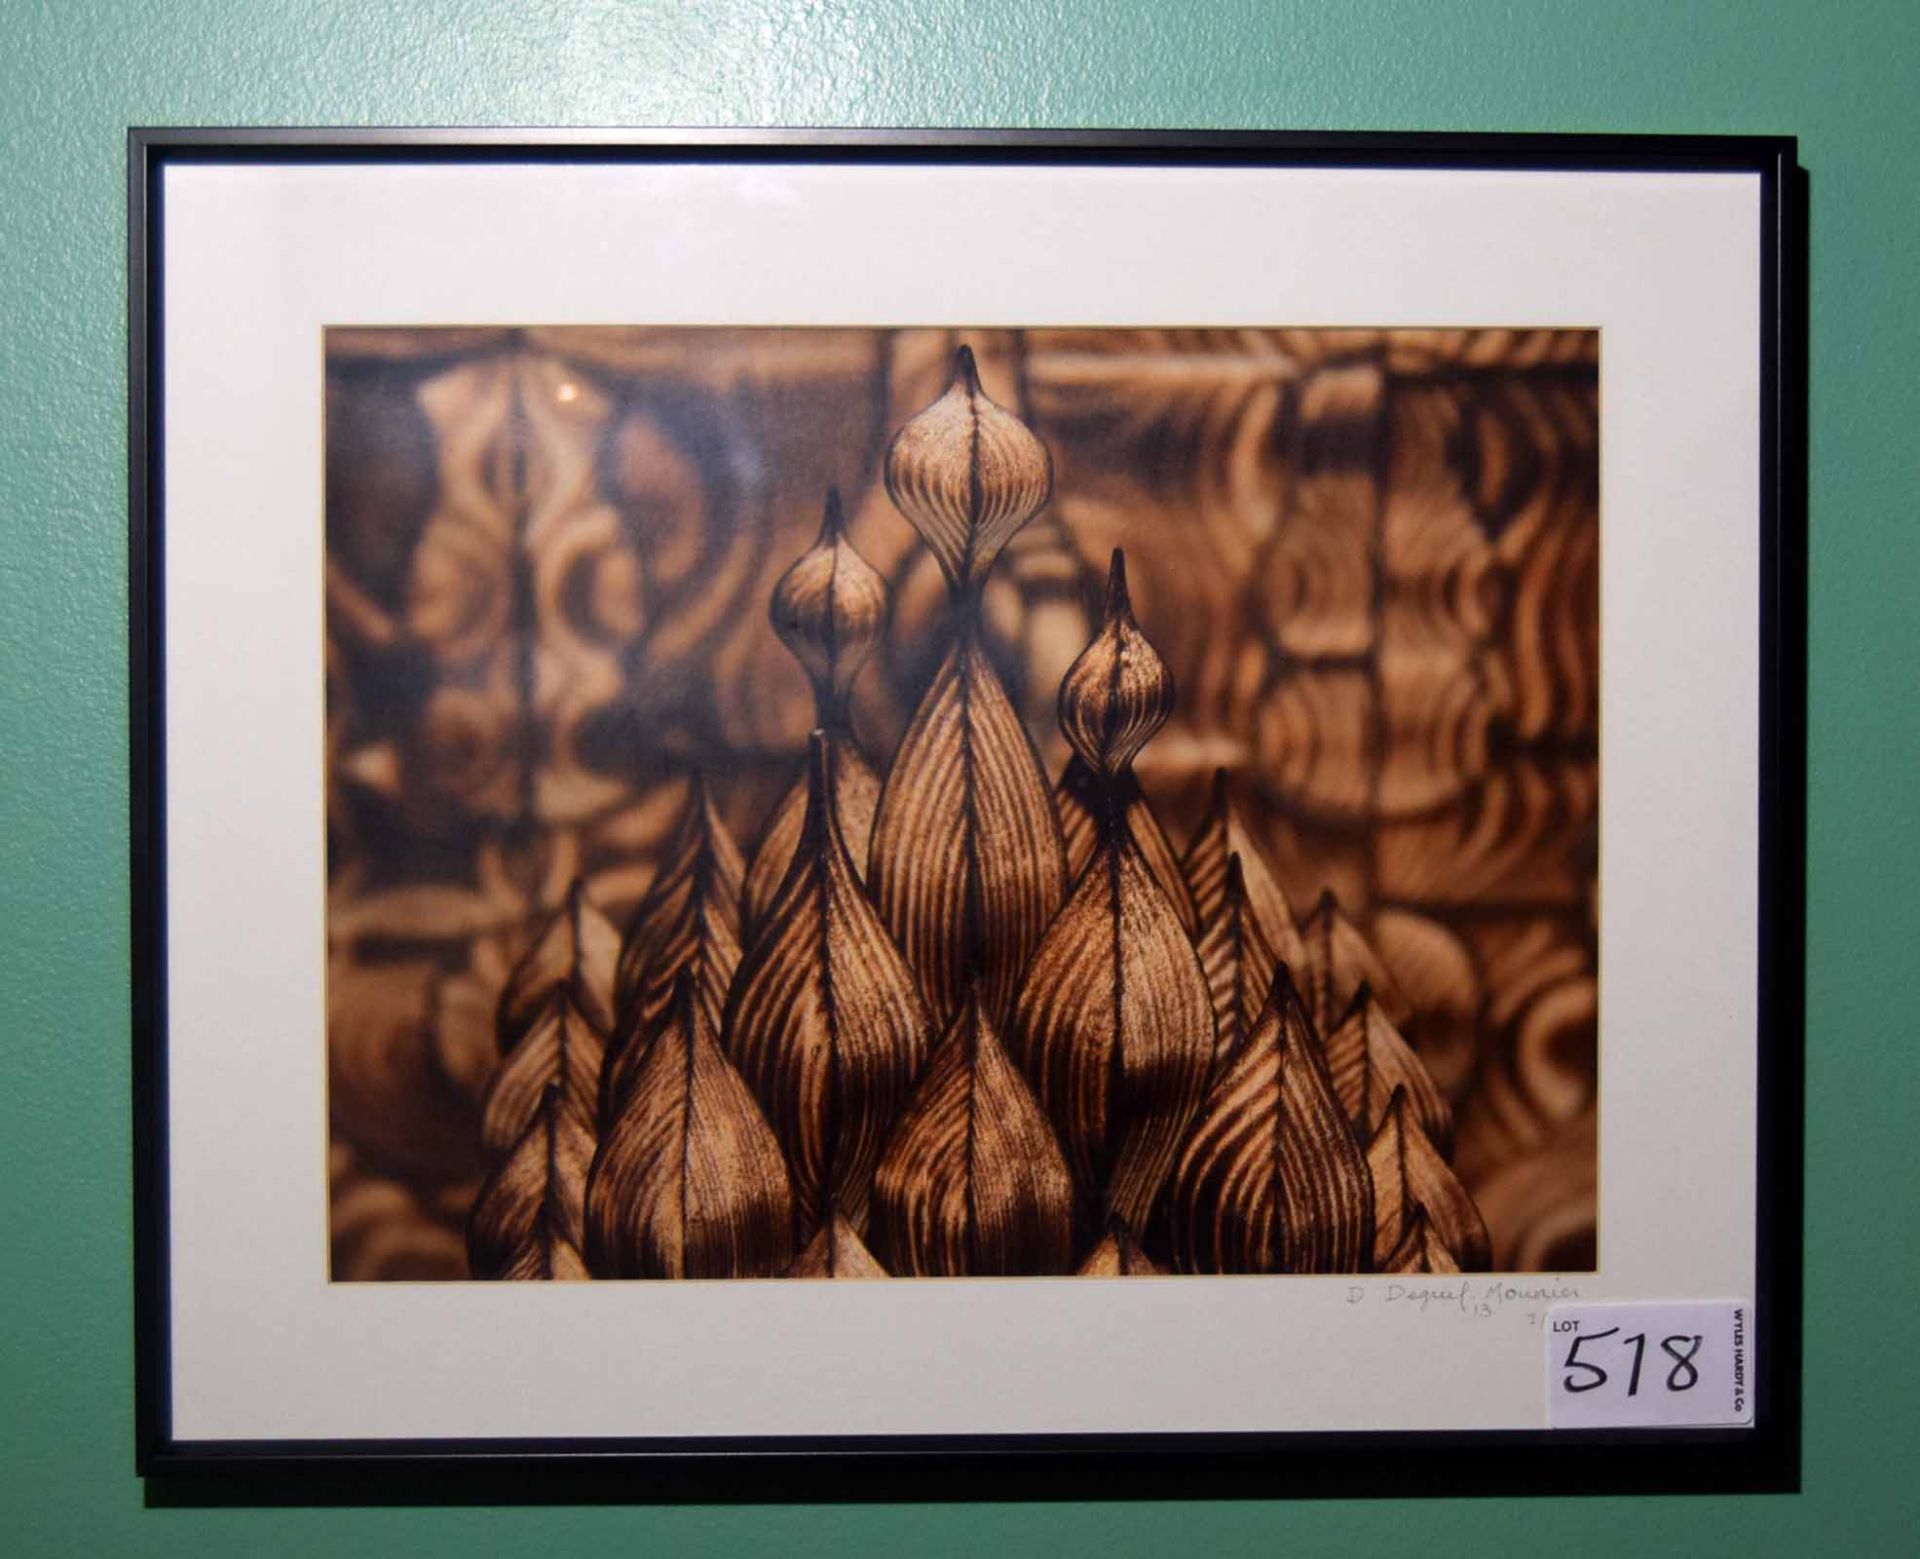 A 510mm x 410mm Framed and Glazed Abstract Photographic Print signed by the Artist D. Deguil